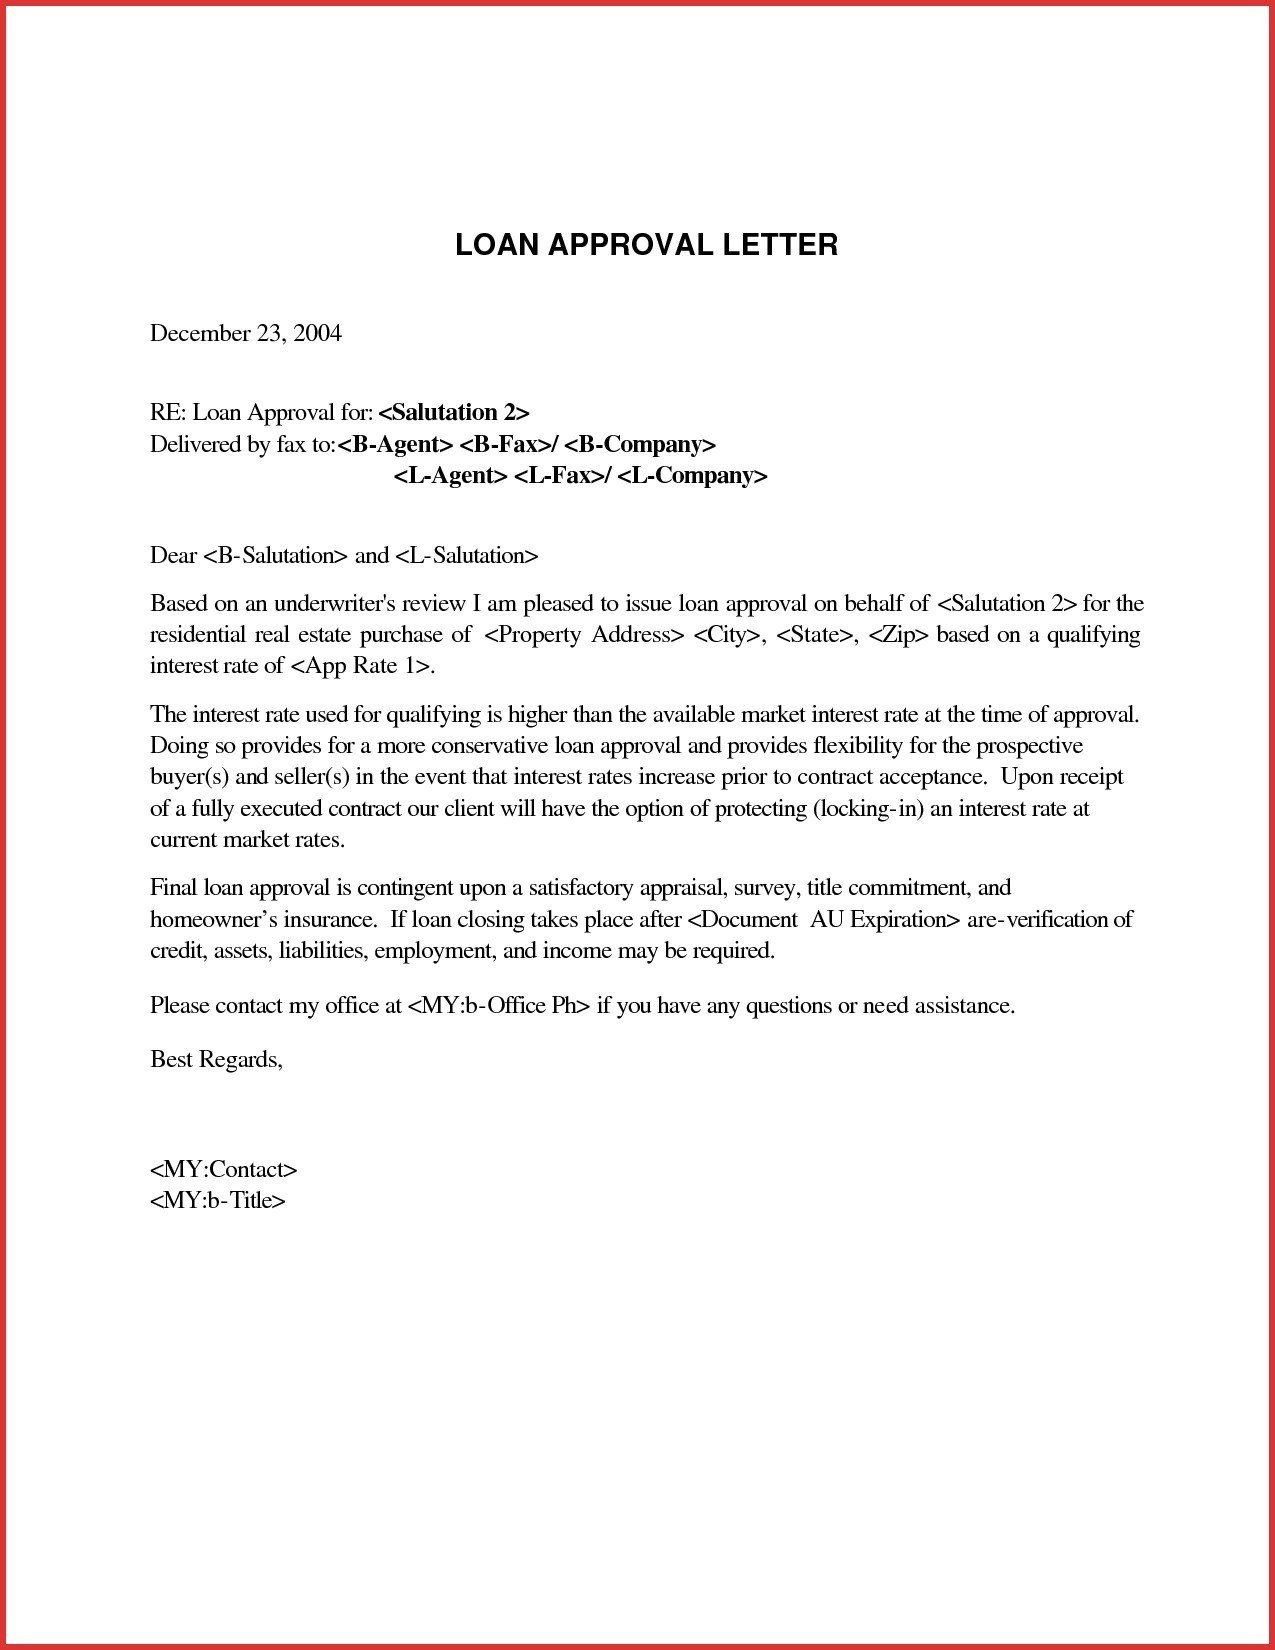 Loan Approval Letter Template - Letter format for Loan Request From Employer New Loan Request Letter